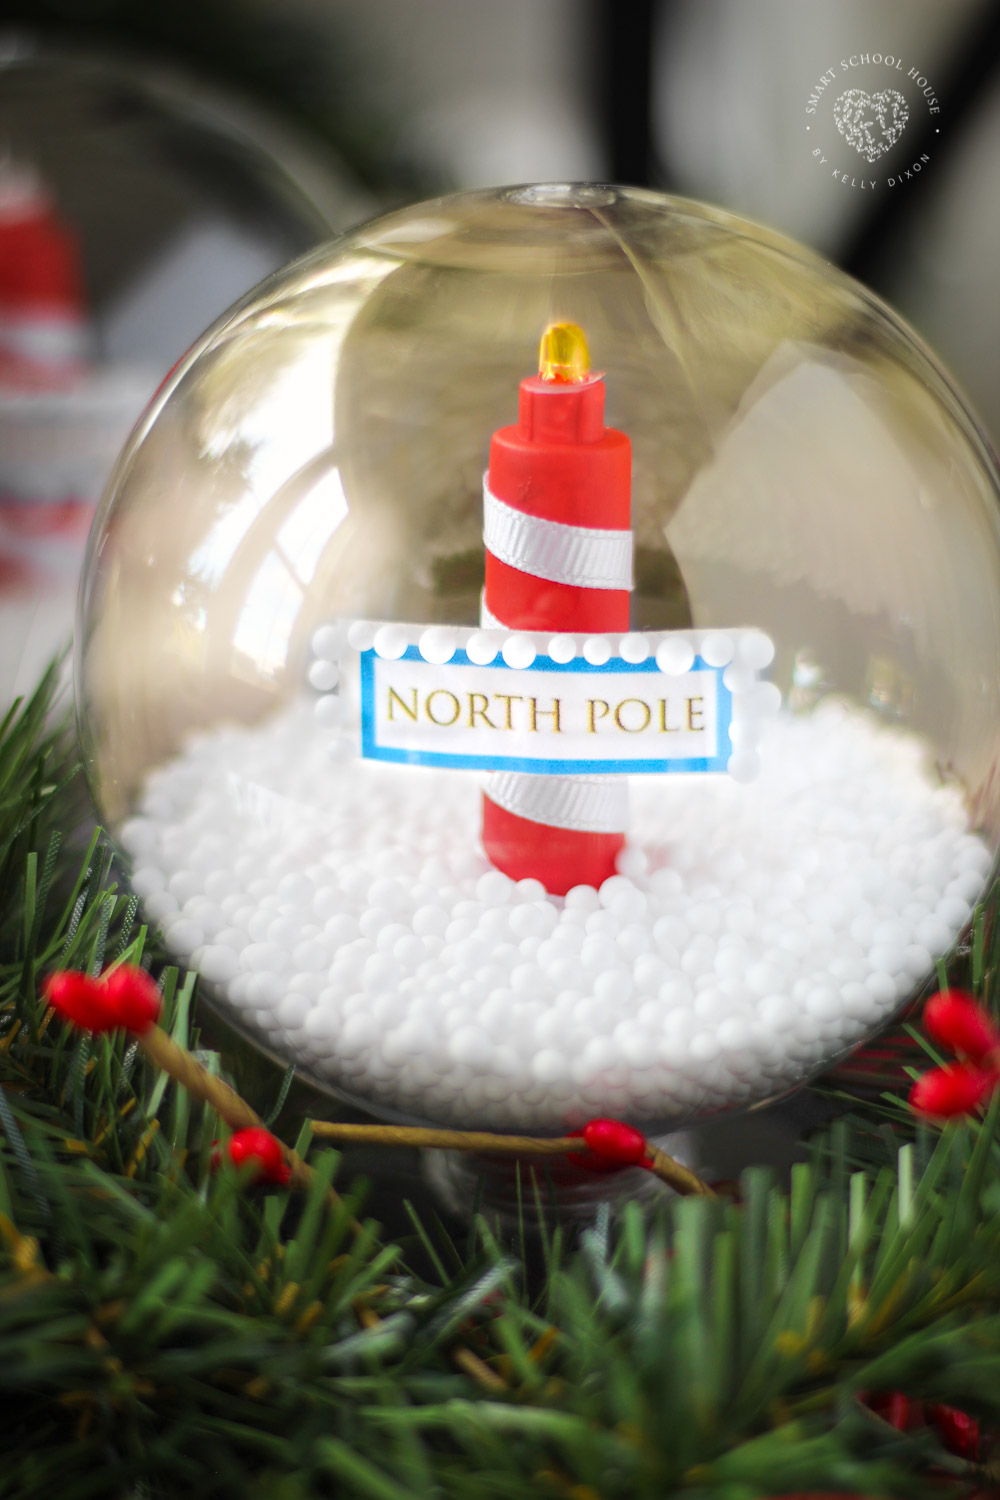 DIY Glowing Solar North Pole Snow Globe Made With a Plastic Ornament for Christmas